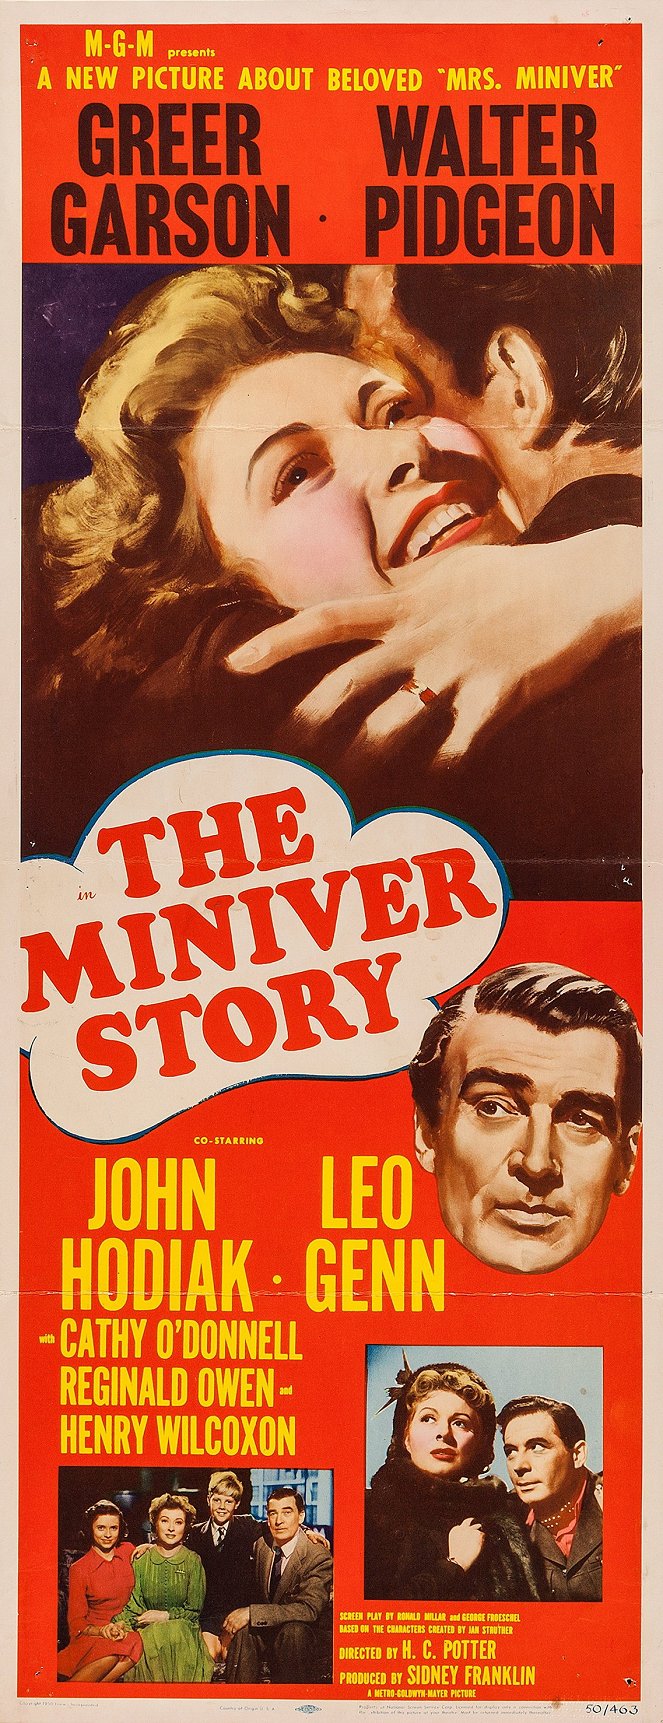 The Miniver Story - Posters